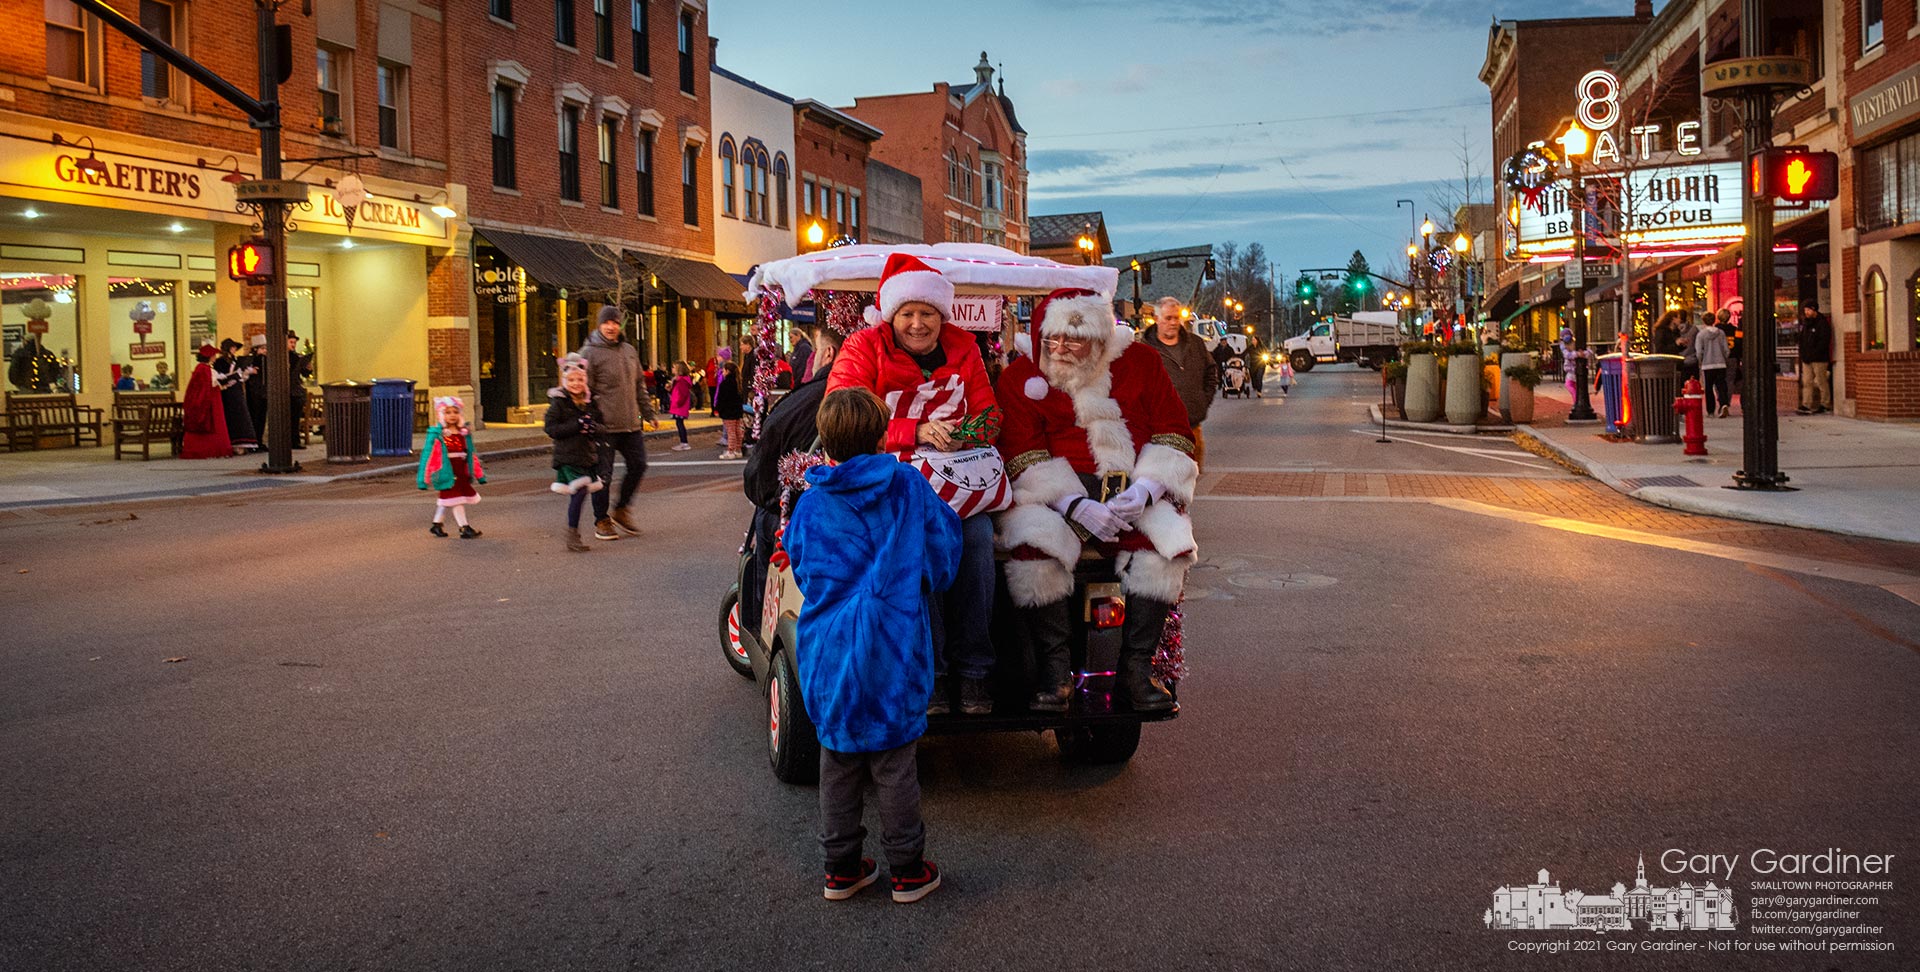 Westerville Mayor Kathy Cocuzzi accompanies Santa Claus who traveled in a golf cart instead of a sleigh and driven by the police chief instead of reindeer to visit with kids and their families after the tree lighting on State Street in Uptown Westerville. My Final Photo for Dec. 3, 2021.